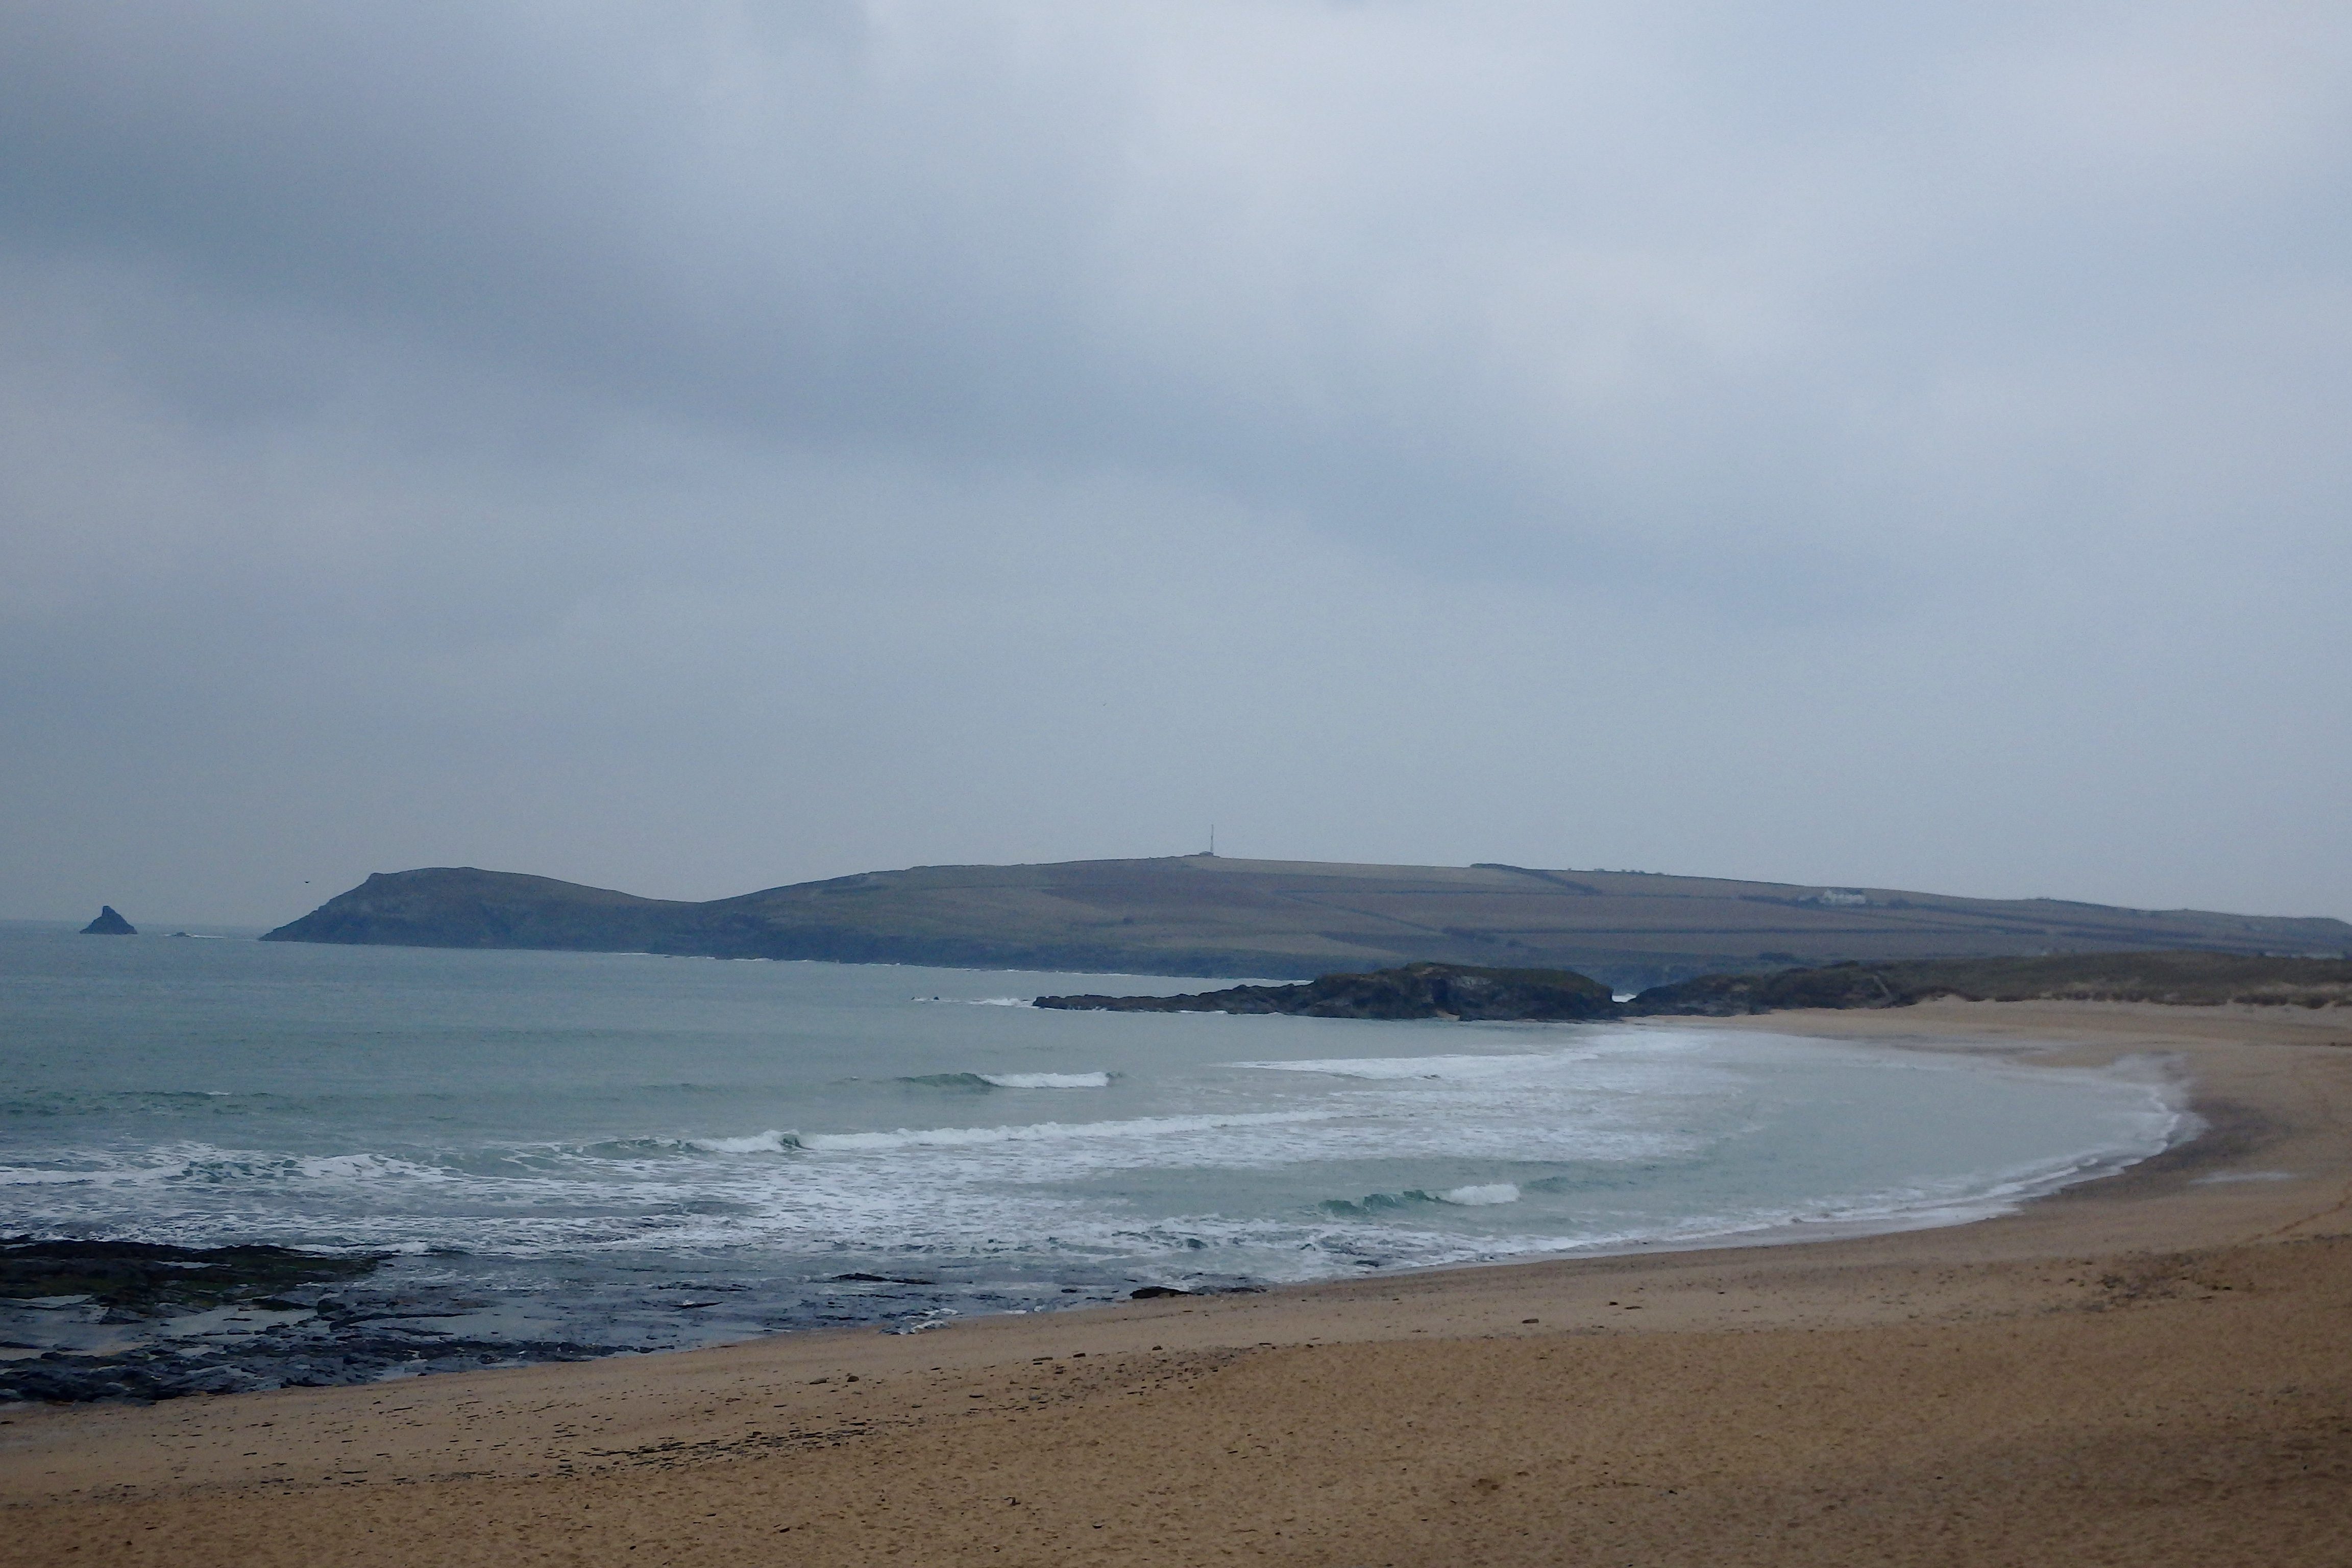 Surf Report for Wednesday 23rd March 2016